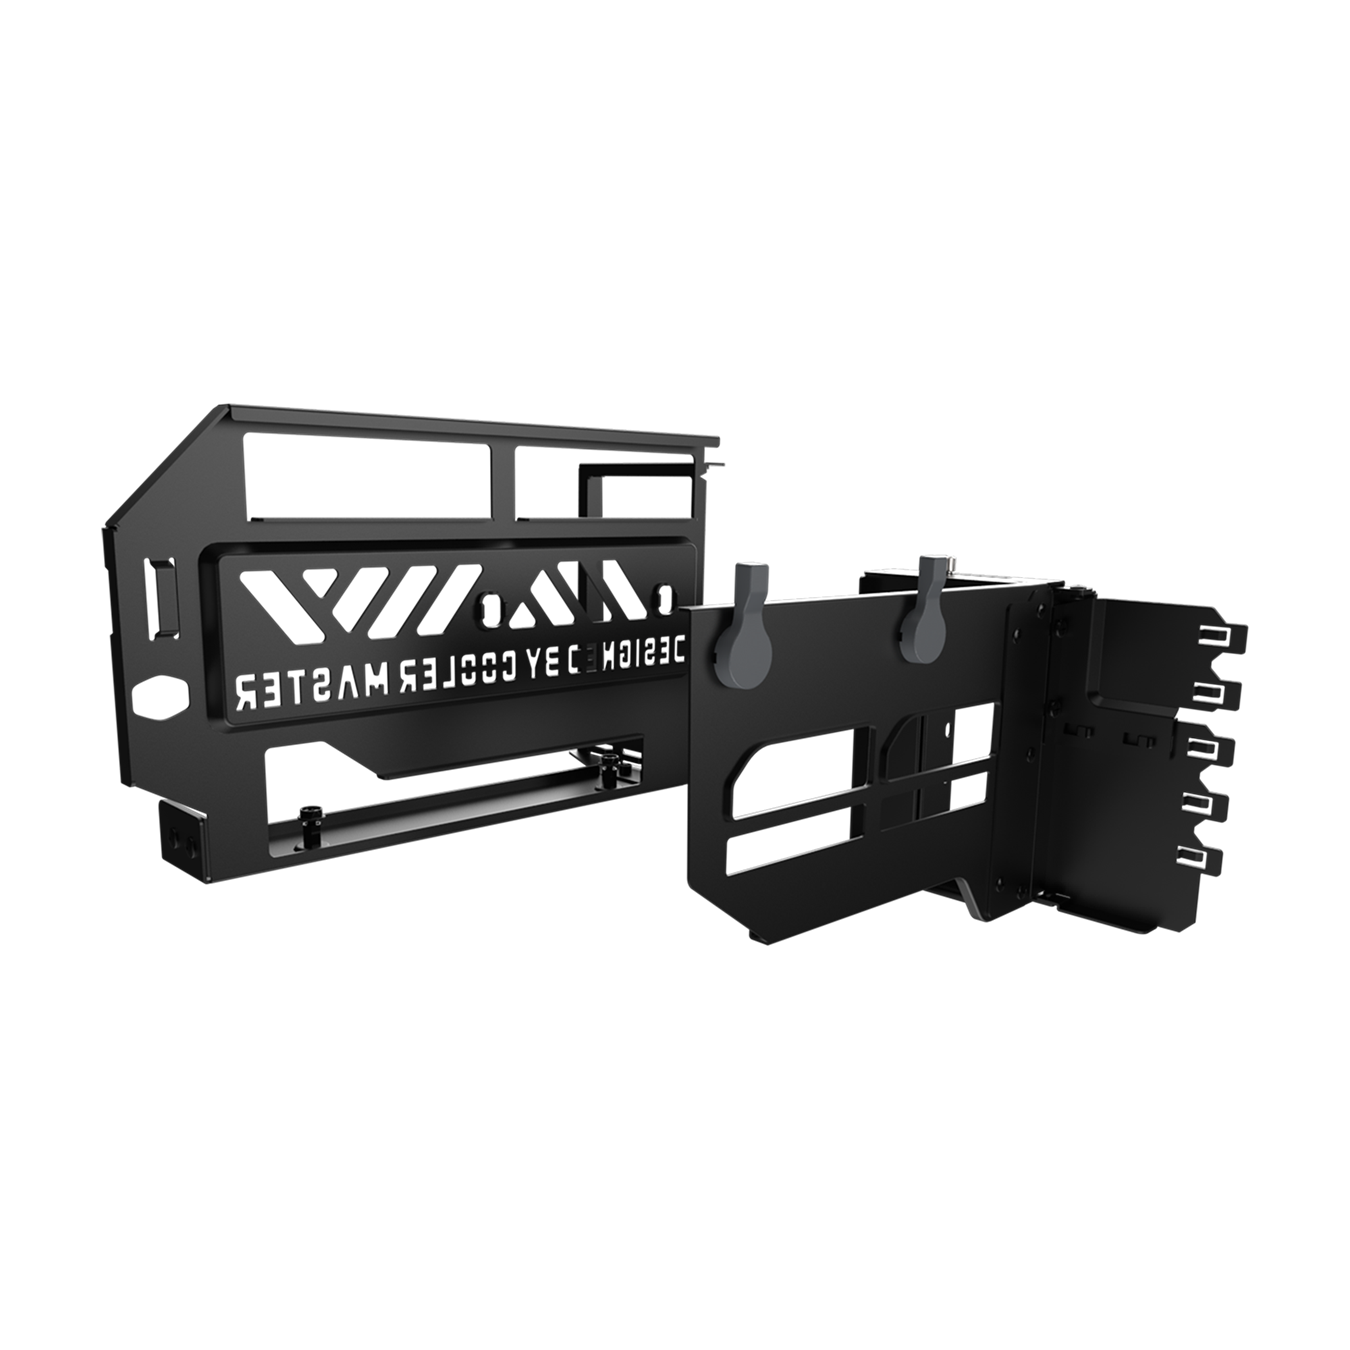 Vertical Graphics Card Holder Kit V3 - The modular design of the Vertical Graphics Card Holder Kit V3 allows GPUs to placed in the system after the holder has been fixed in a preferred layout. 